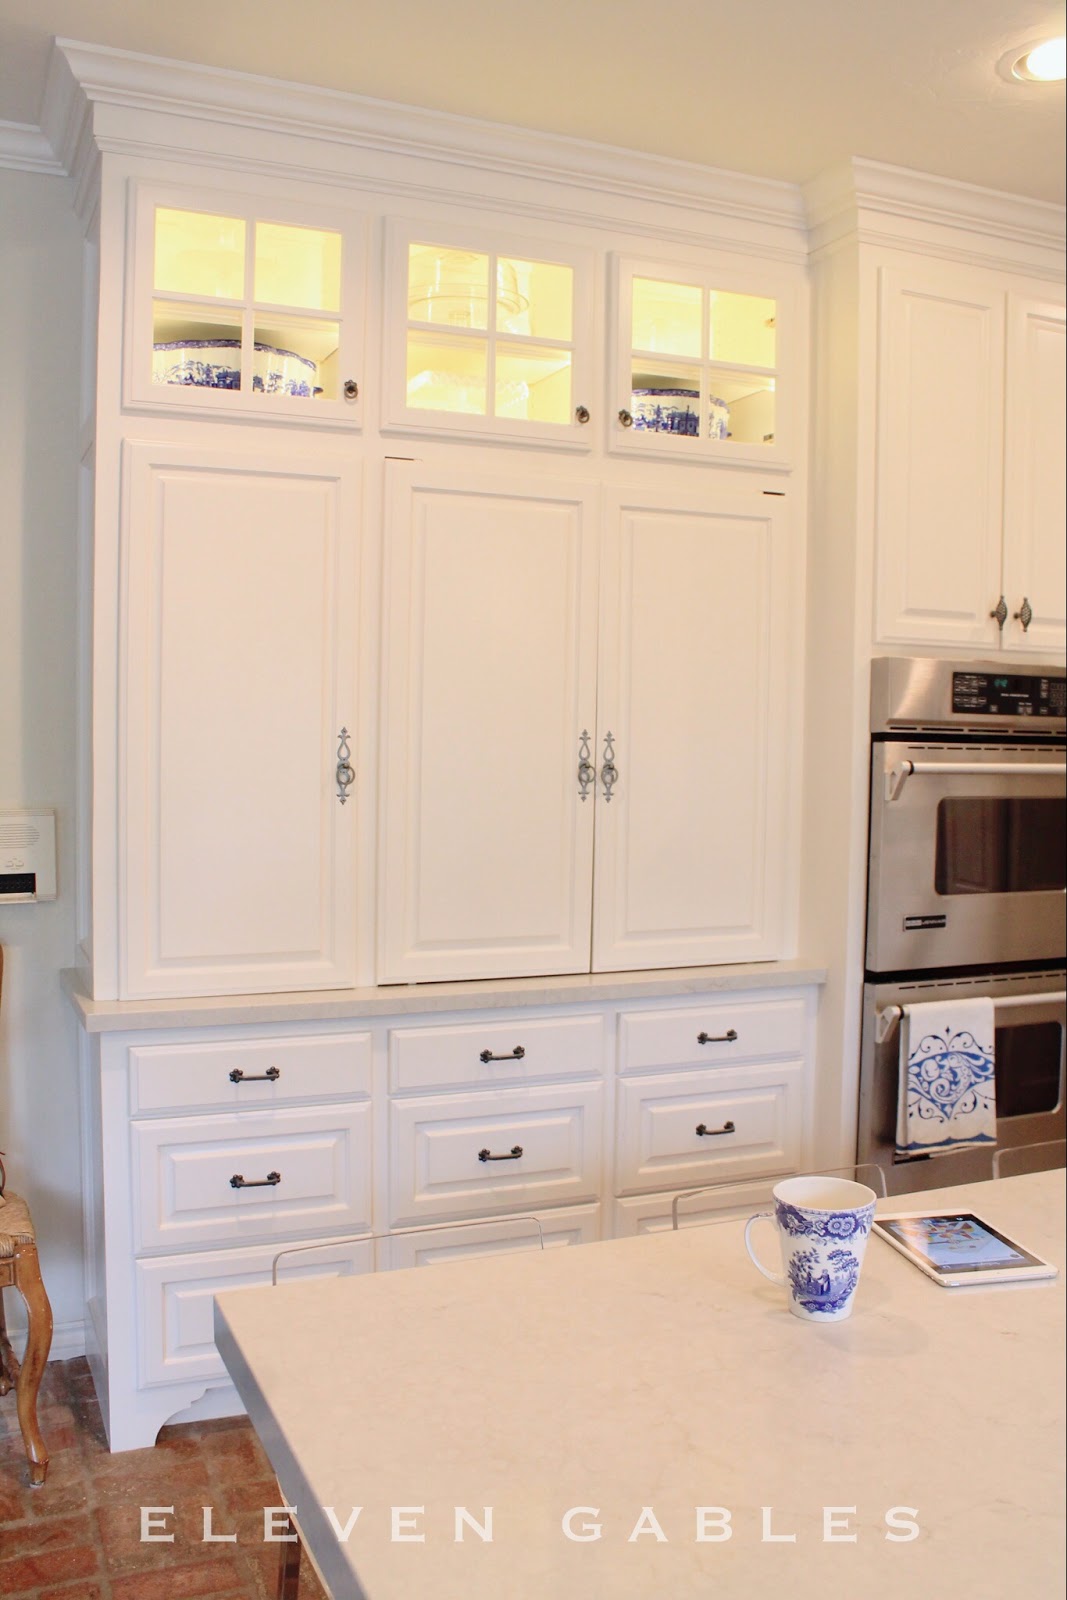 Hidden Appliance Cabinet and Desk Command Center in the Kitchen - Eleven  Gables